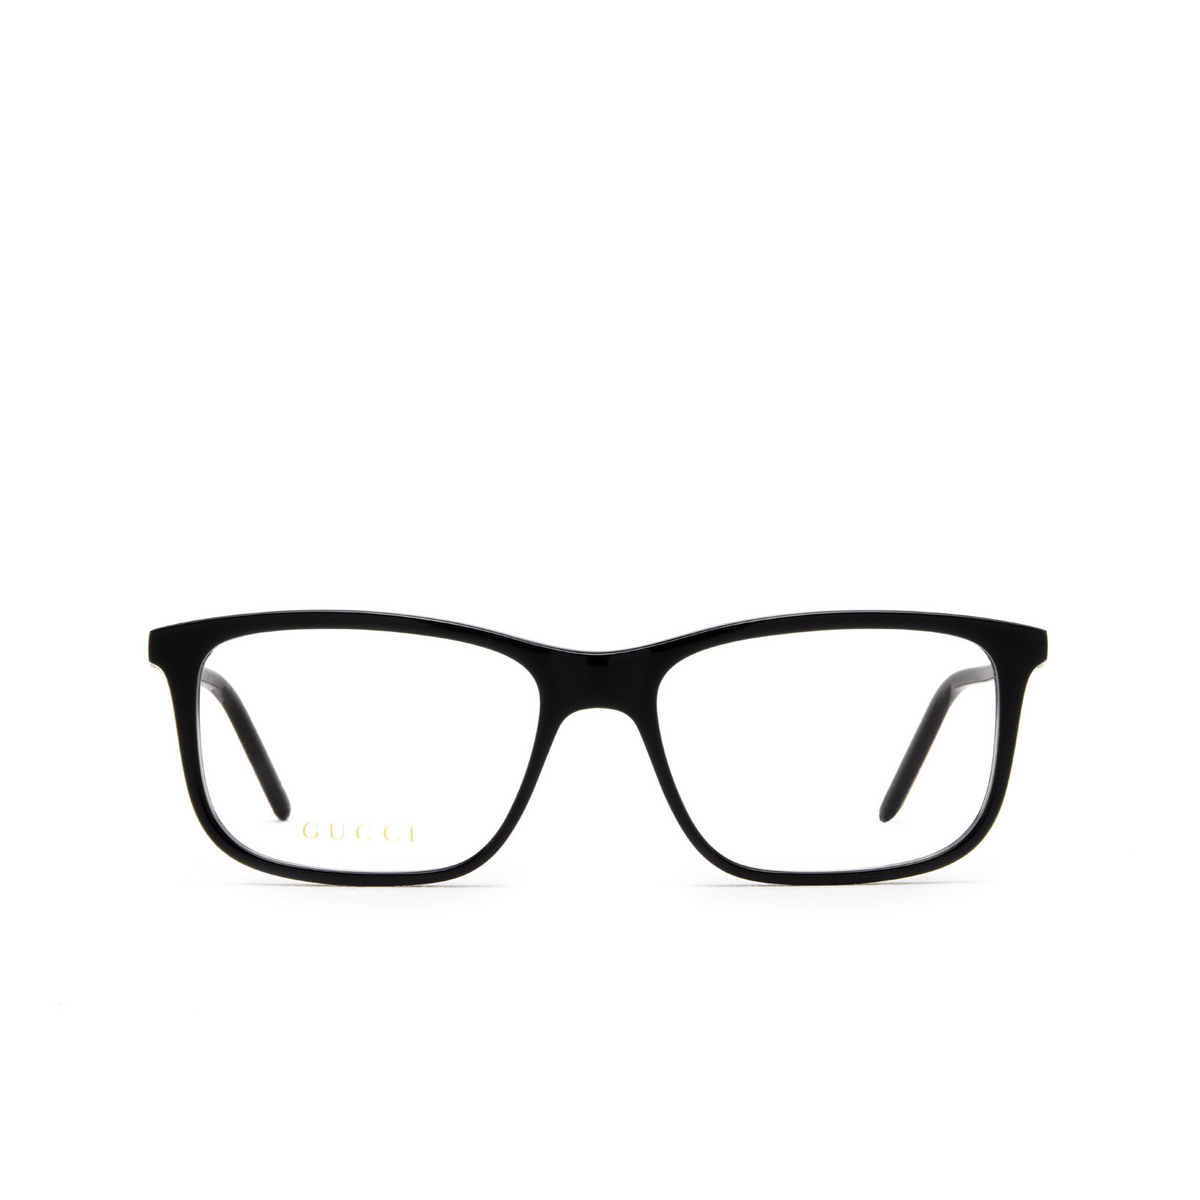 Gucci® Rectangle Eyeglasses: GG1159O color Black 001 - front view.